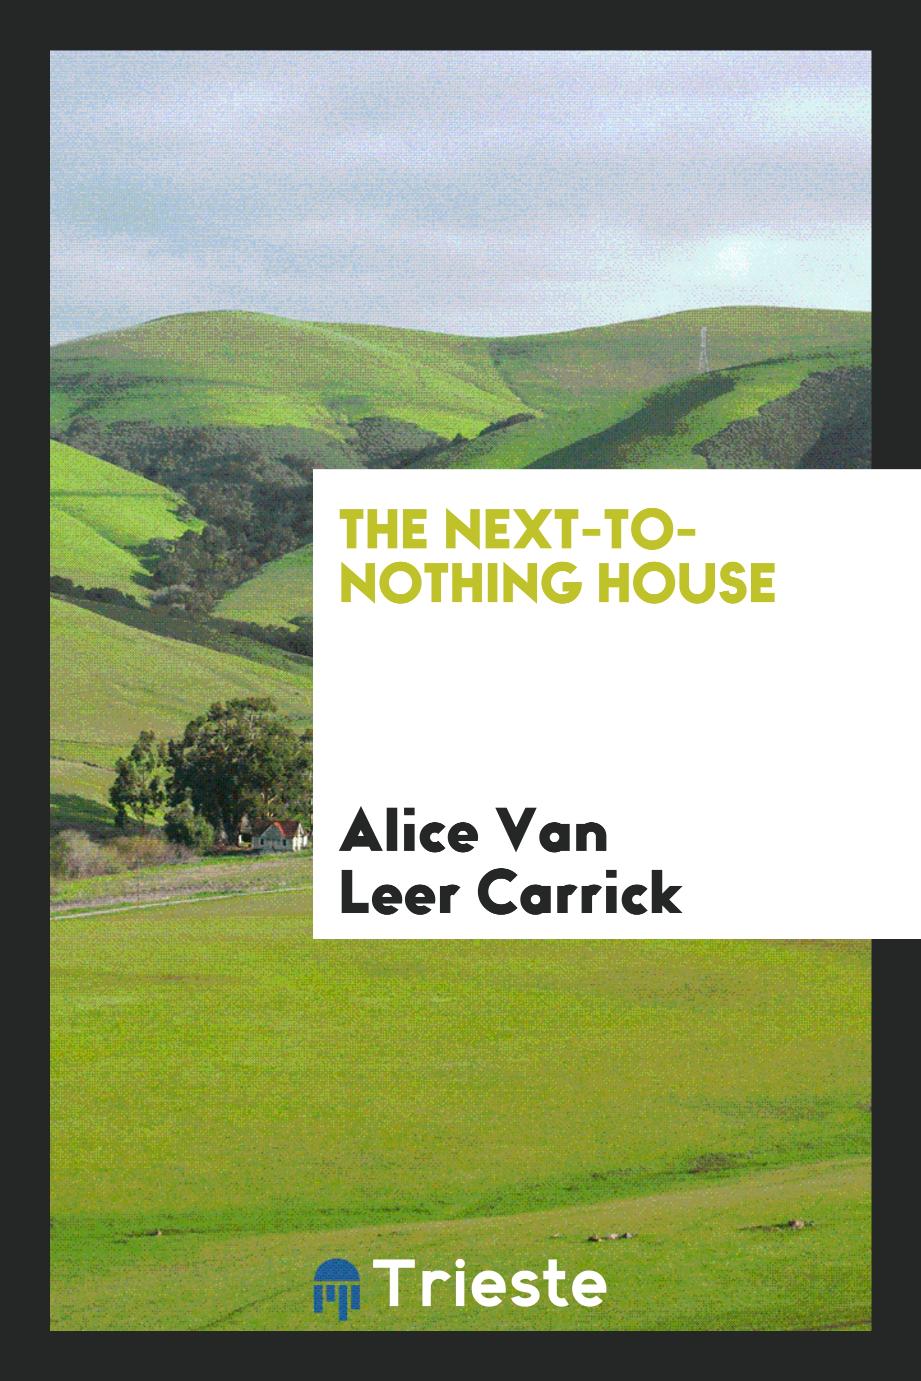 The next-to-nothing house